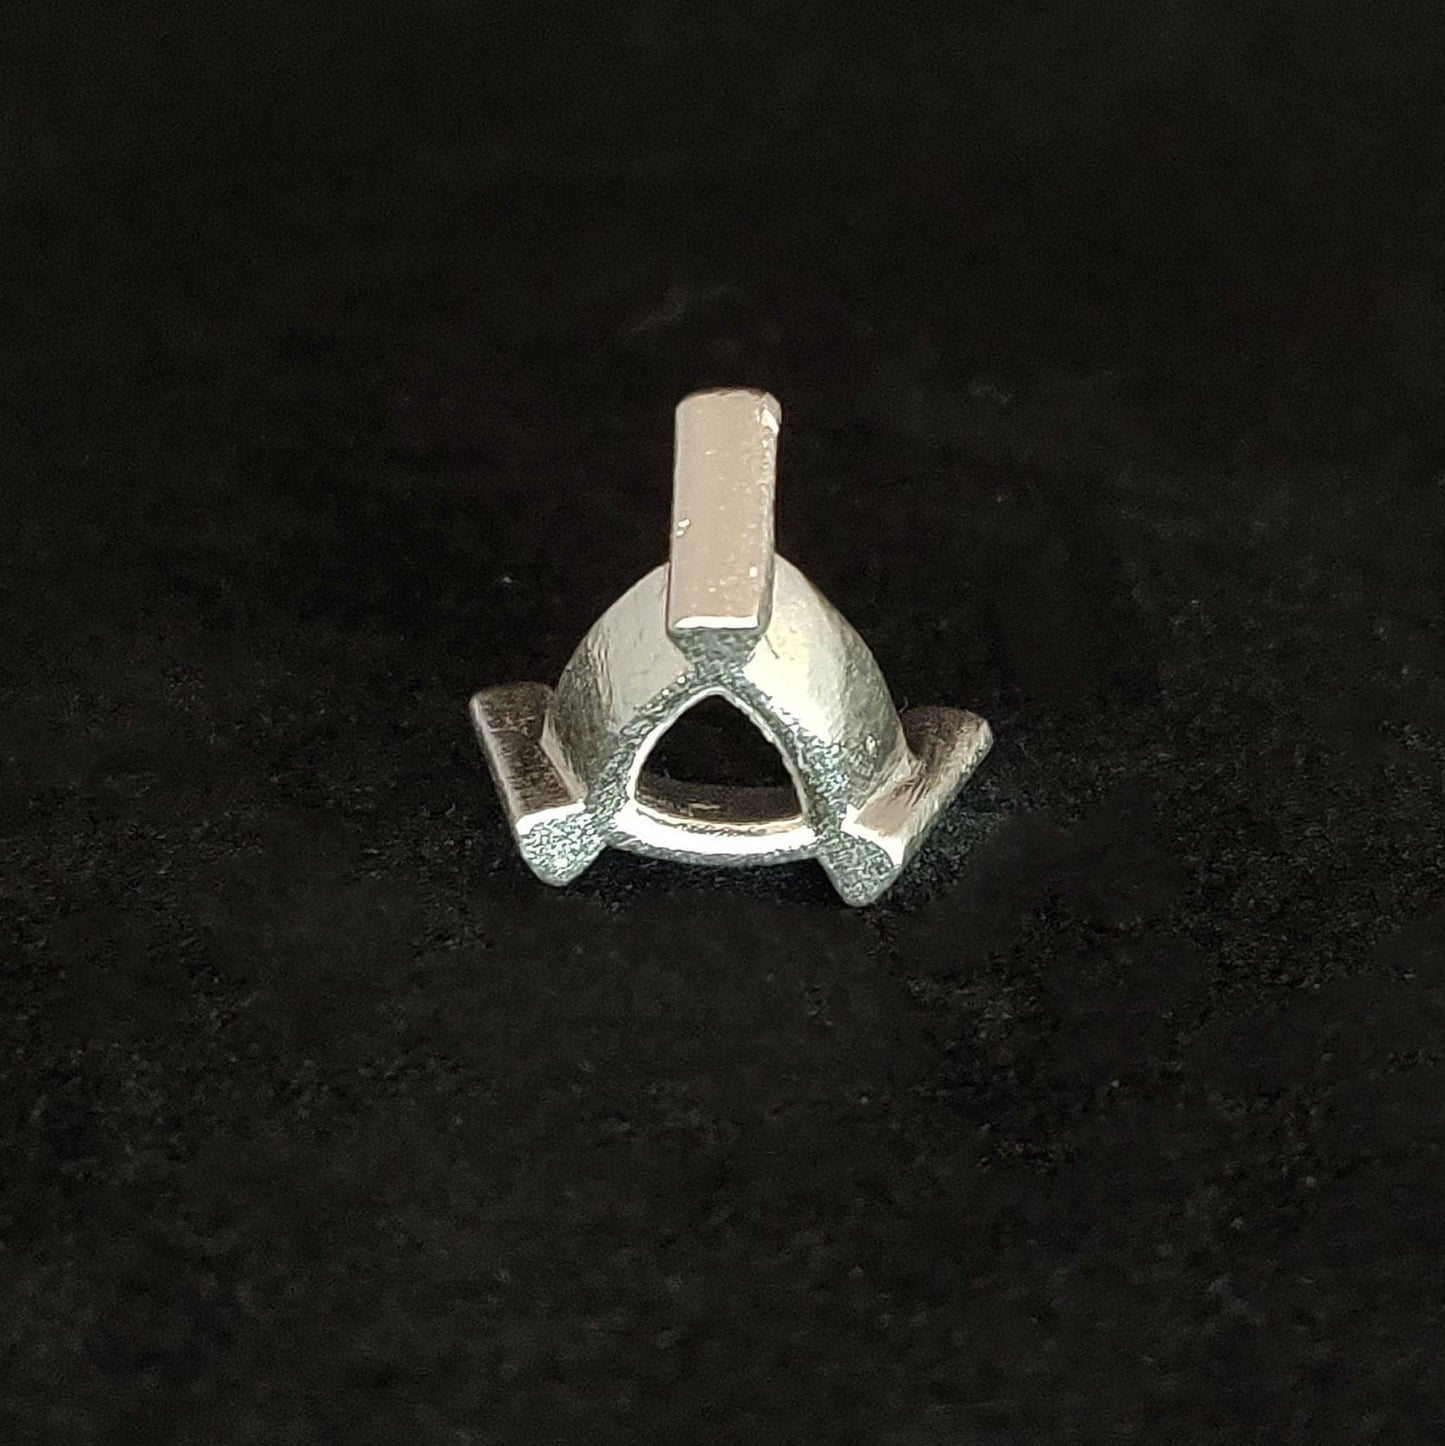 Rear view of a silver trillion prong setting on a black background.